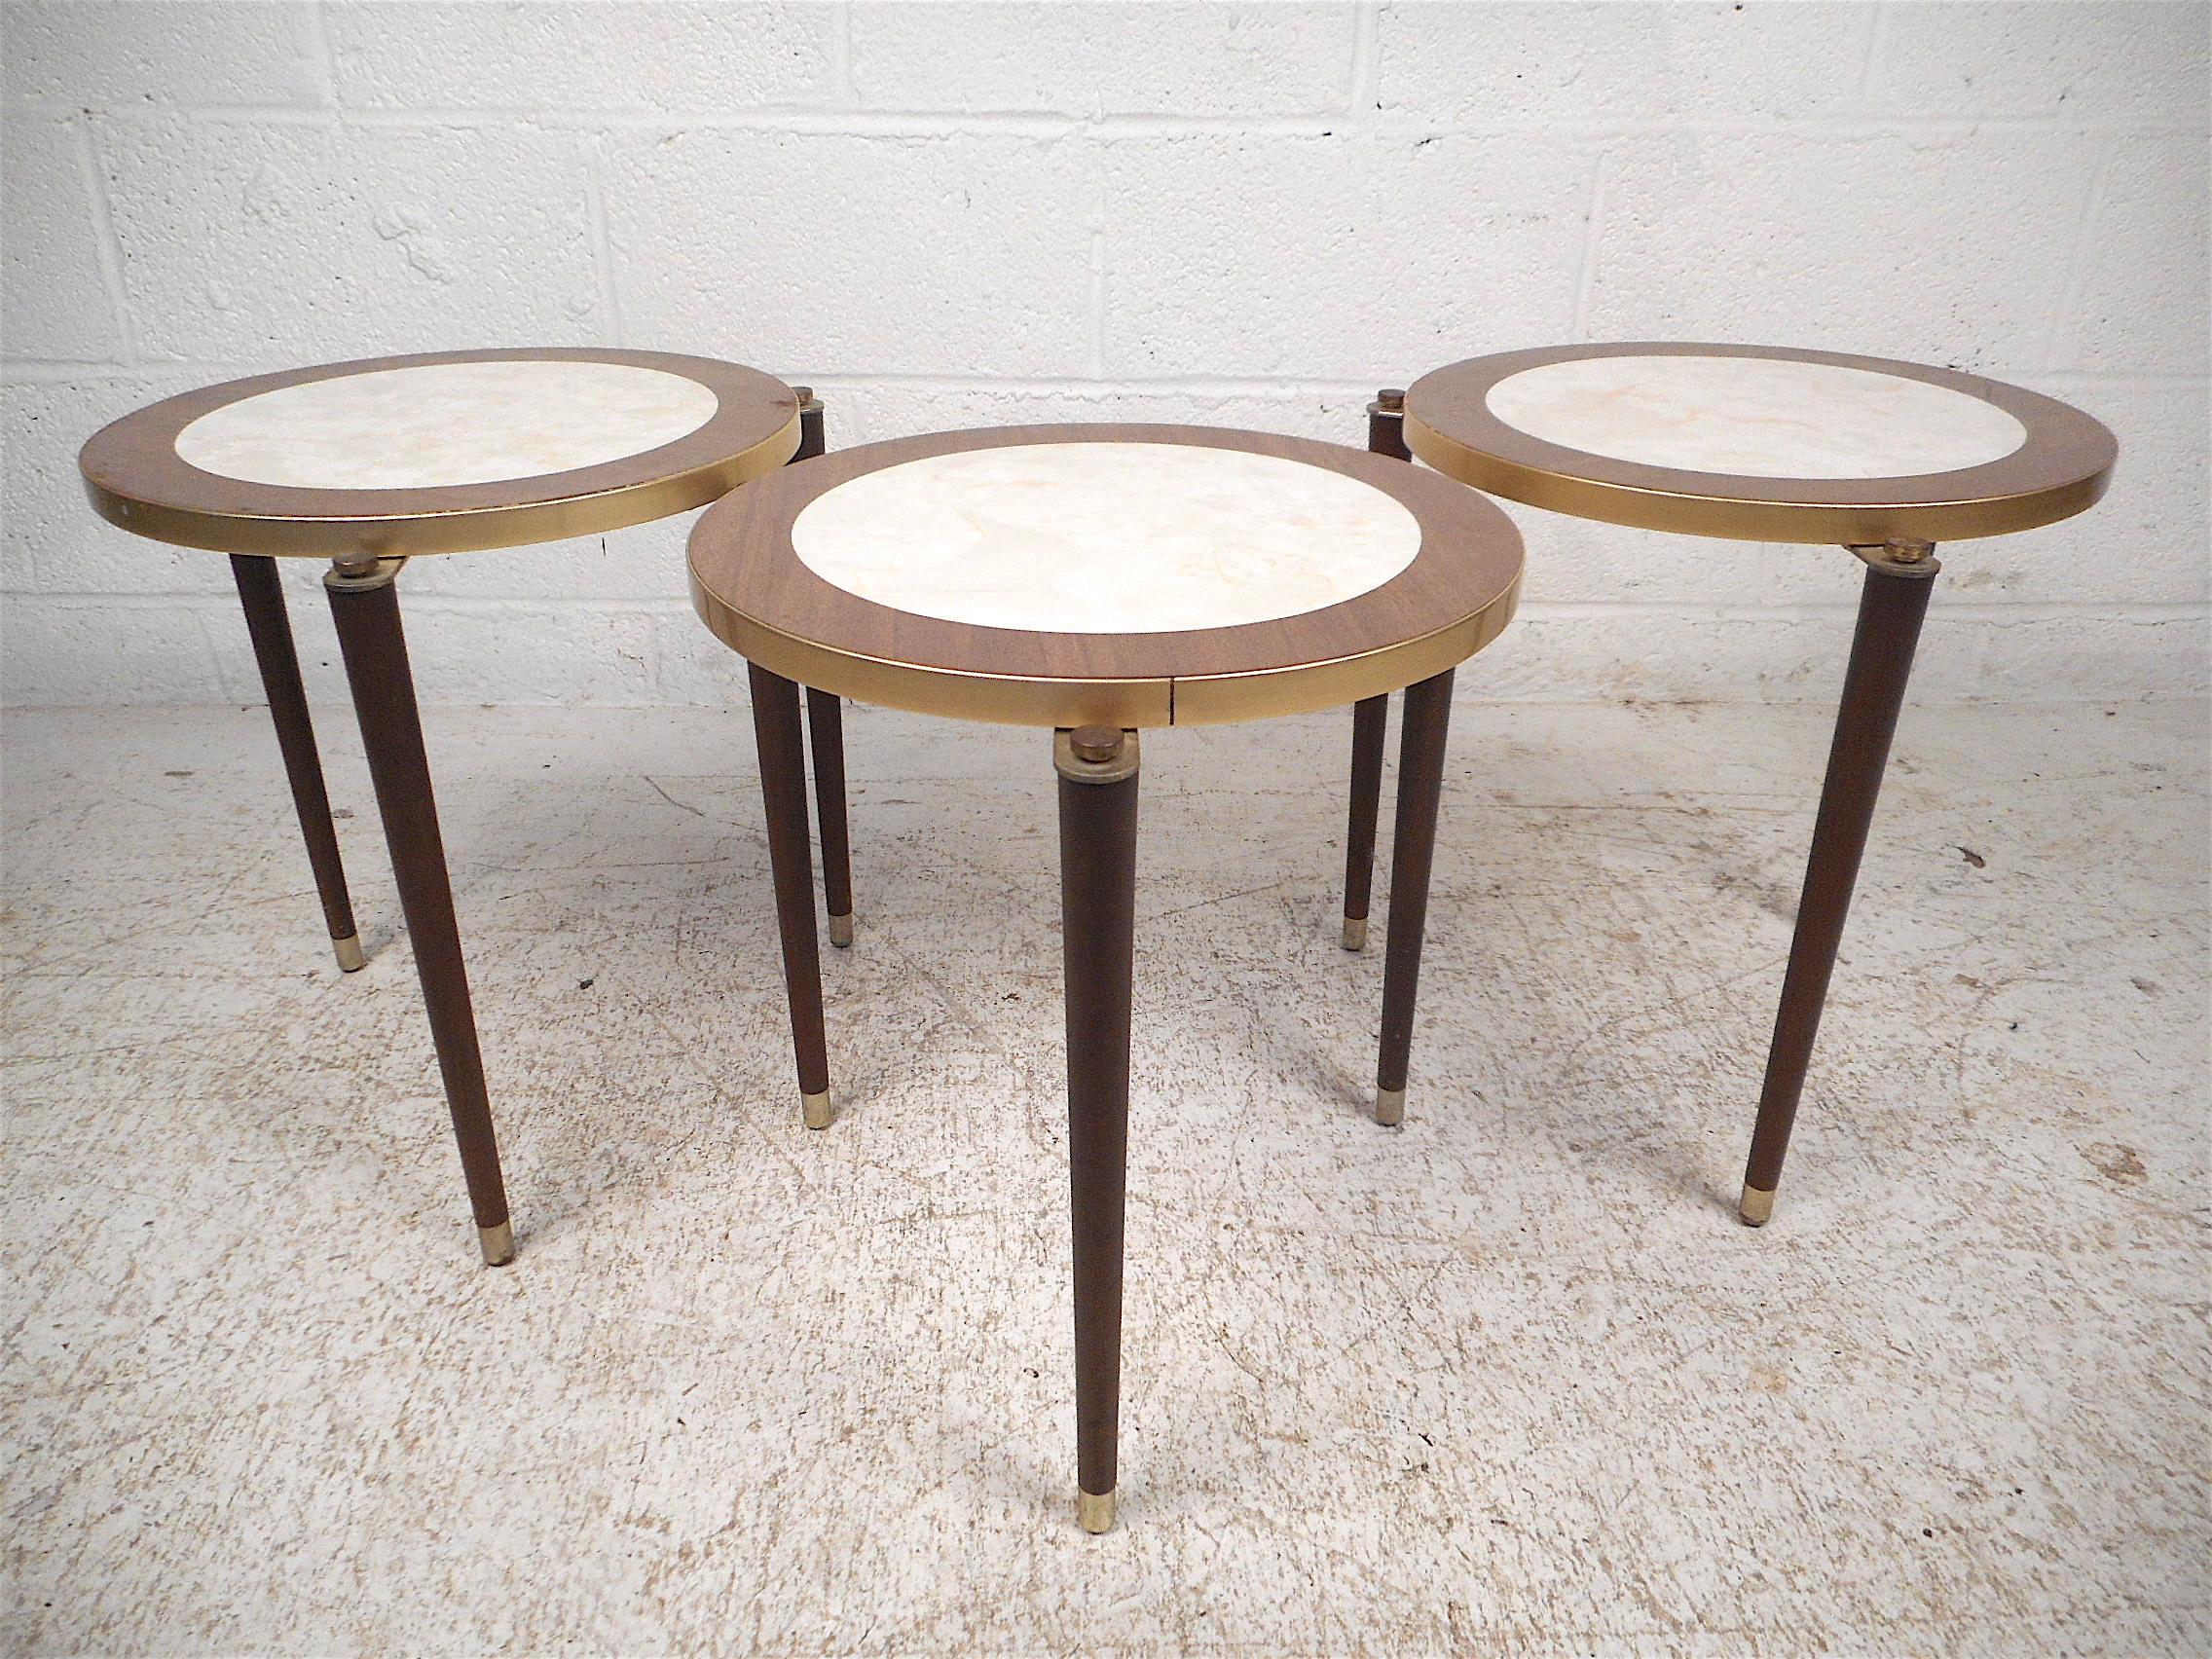 Stylish midcentury nesting tables. Decorative metal trim around the sides and on the feet, tapered legs and inlaid tabletops. Tables stack neatly saving space when not needed. Handy and good-looking addition to any modern interior. Please confirm